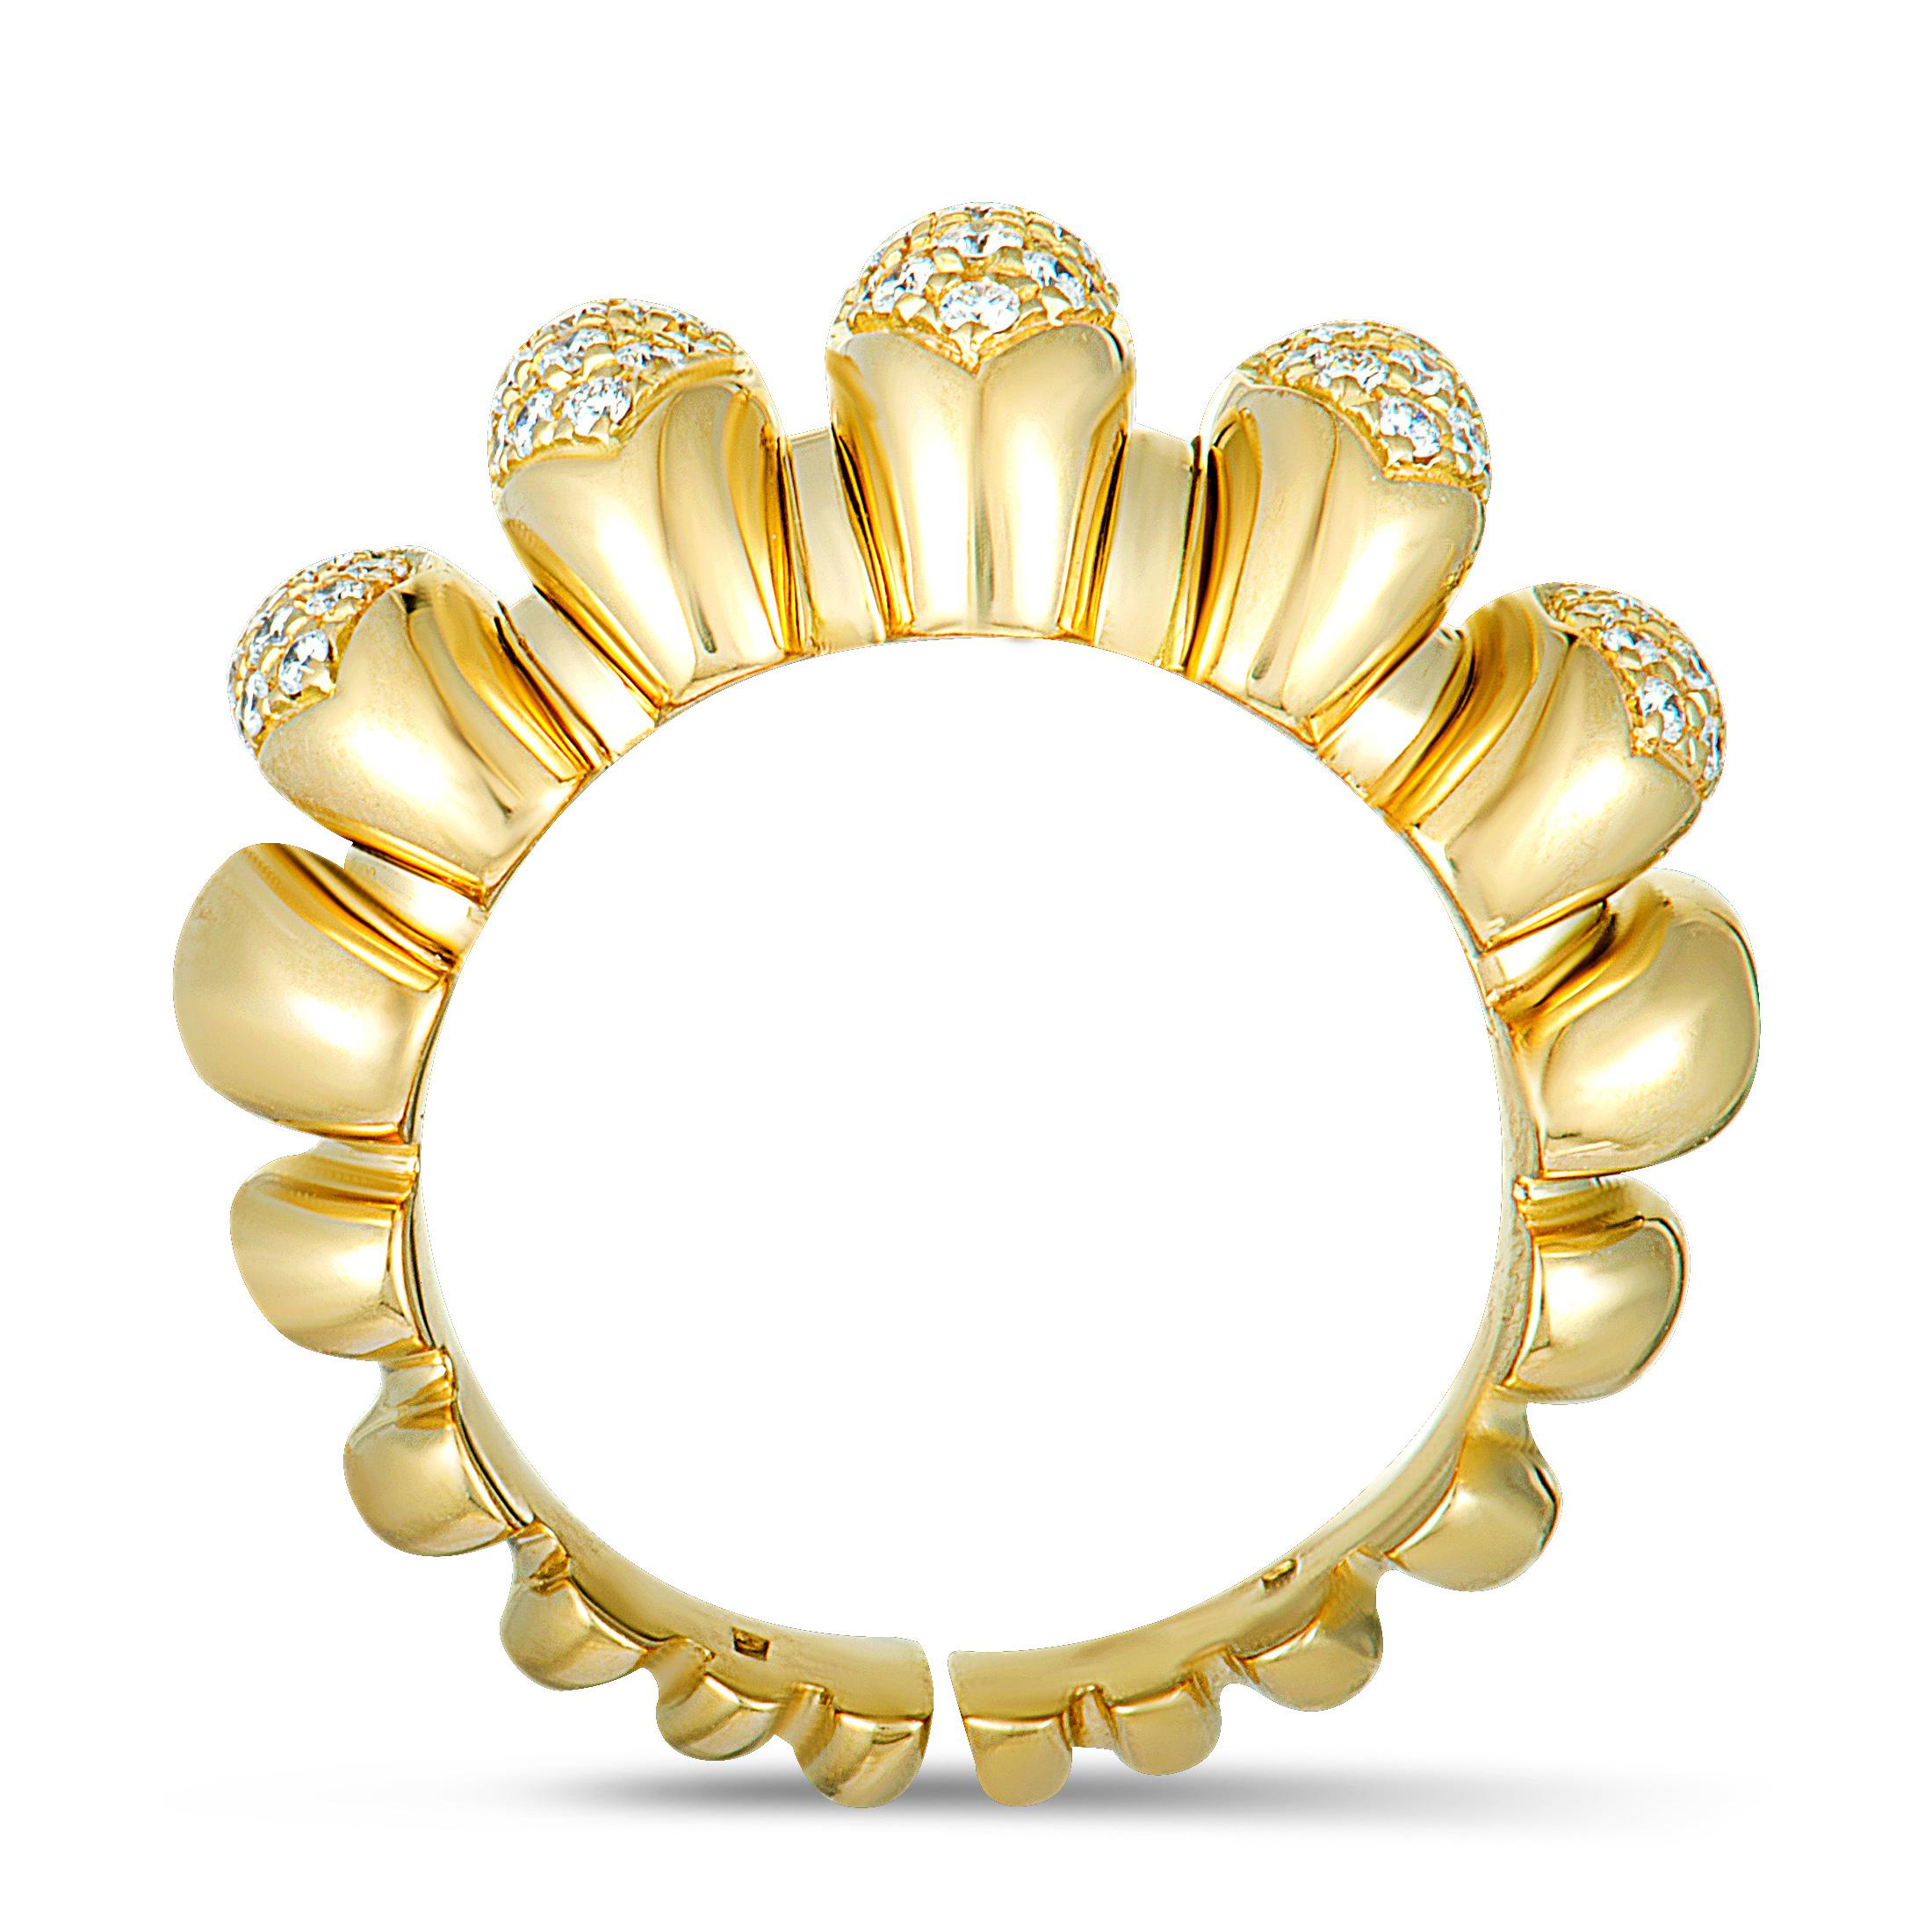 A stunningly offbeat design is beautifully presented in luxuriously gleaming 18K yellow gold in this fascinating ring that is created by Bvlgari. The ring is splendidly decorated with a plethora of scintillating diamonds, offering an incredibly